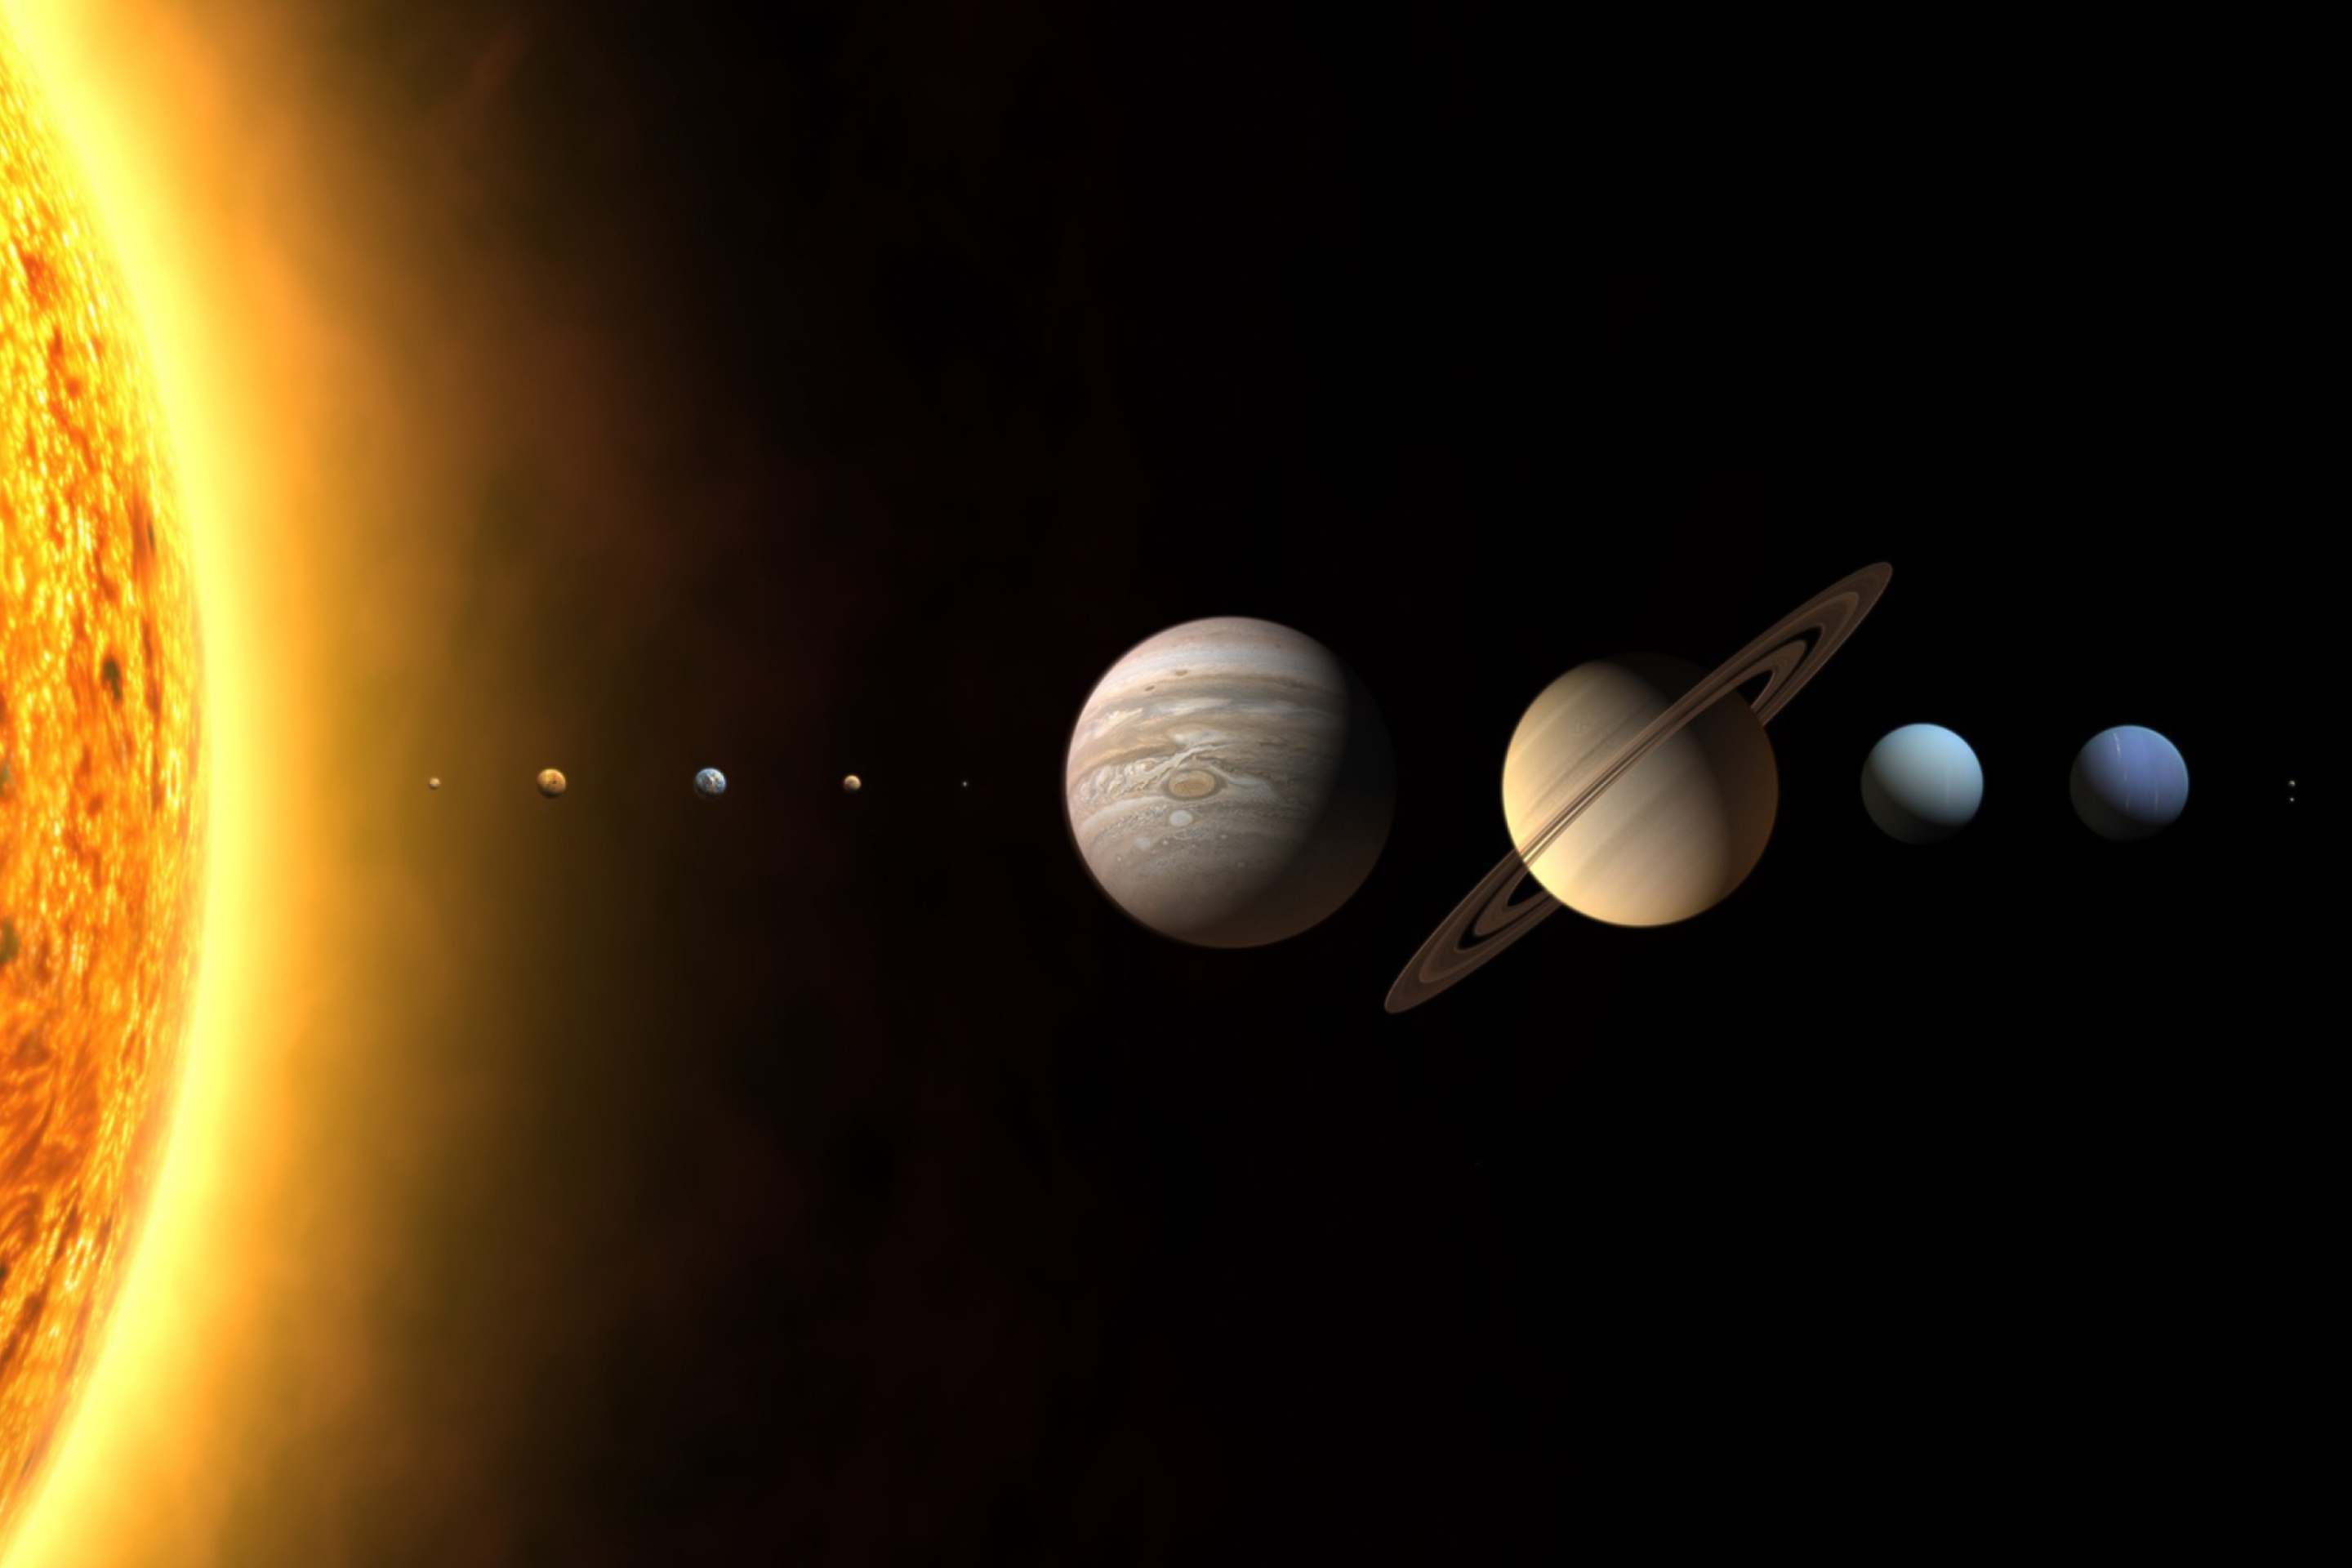 Planets And Space wallpaper 2880x1920